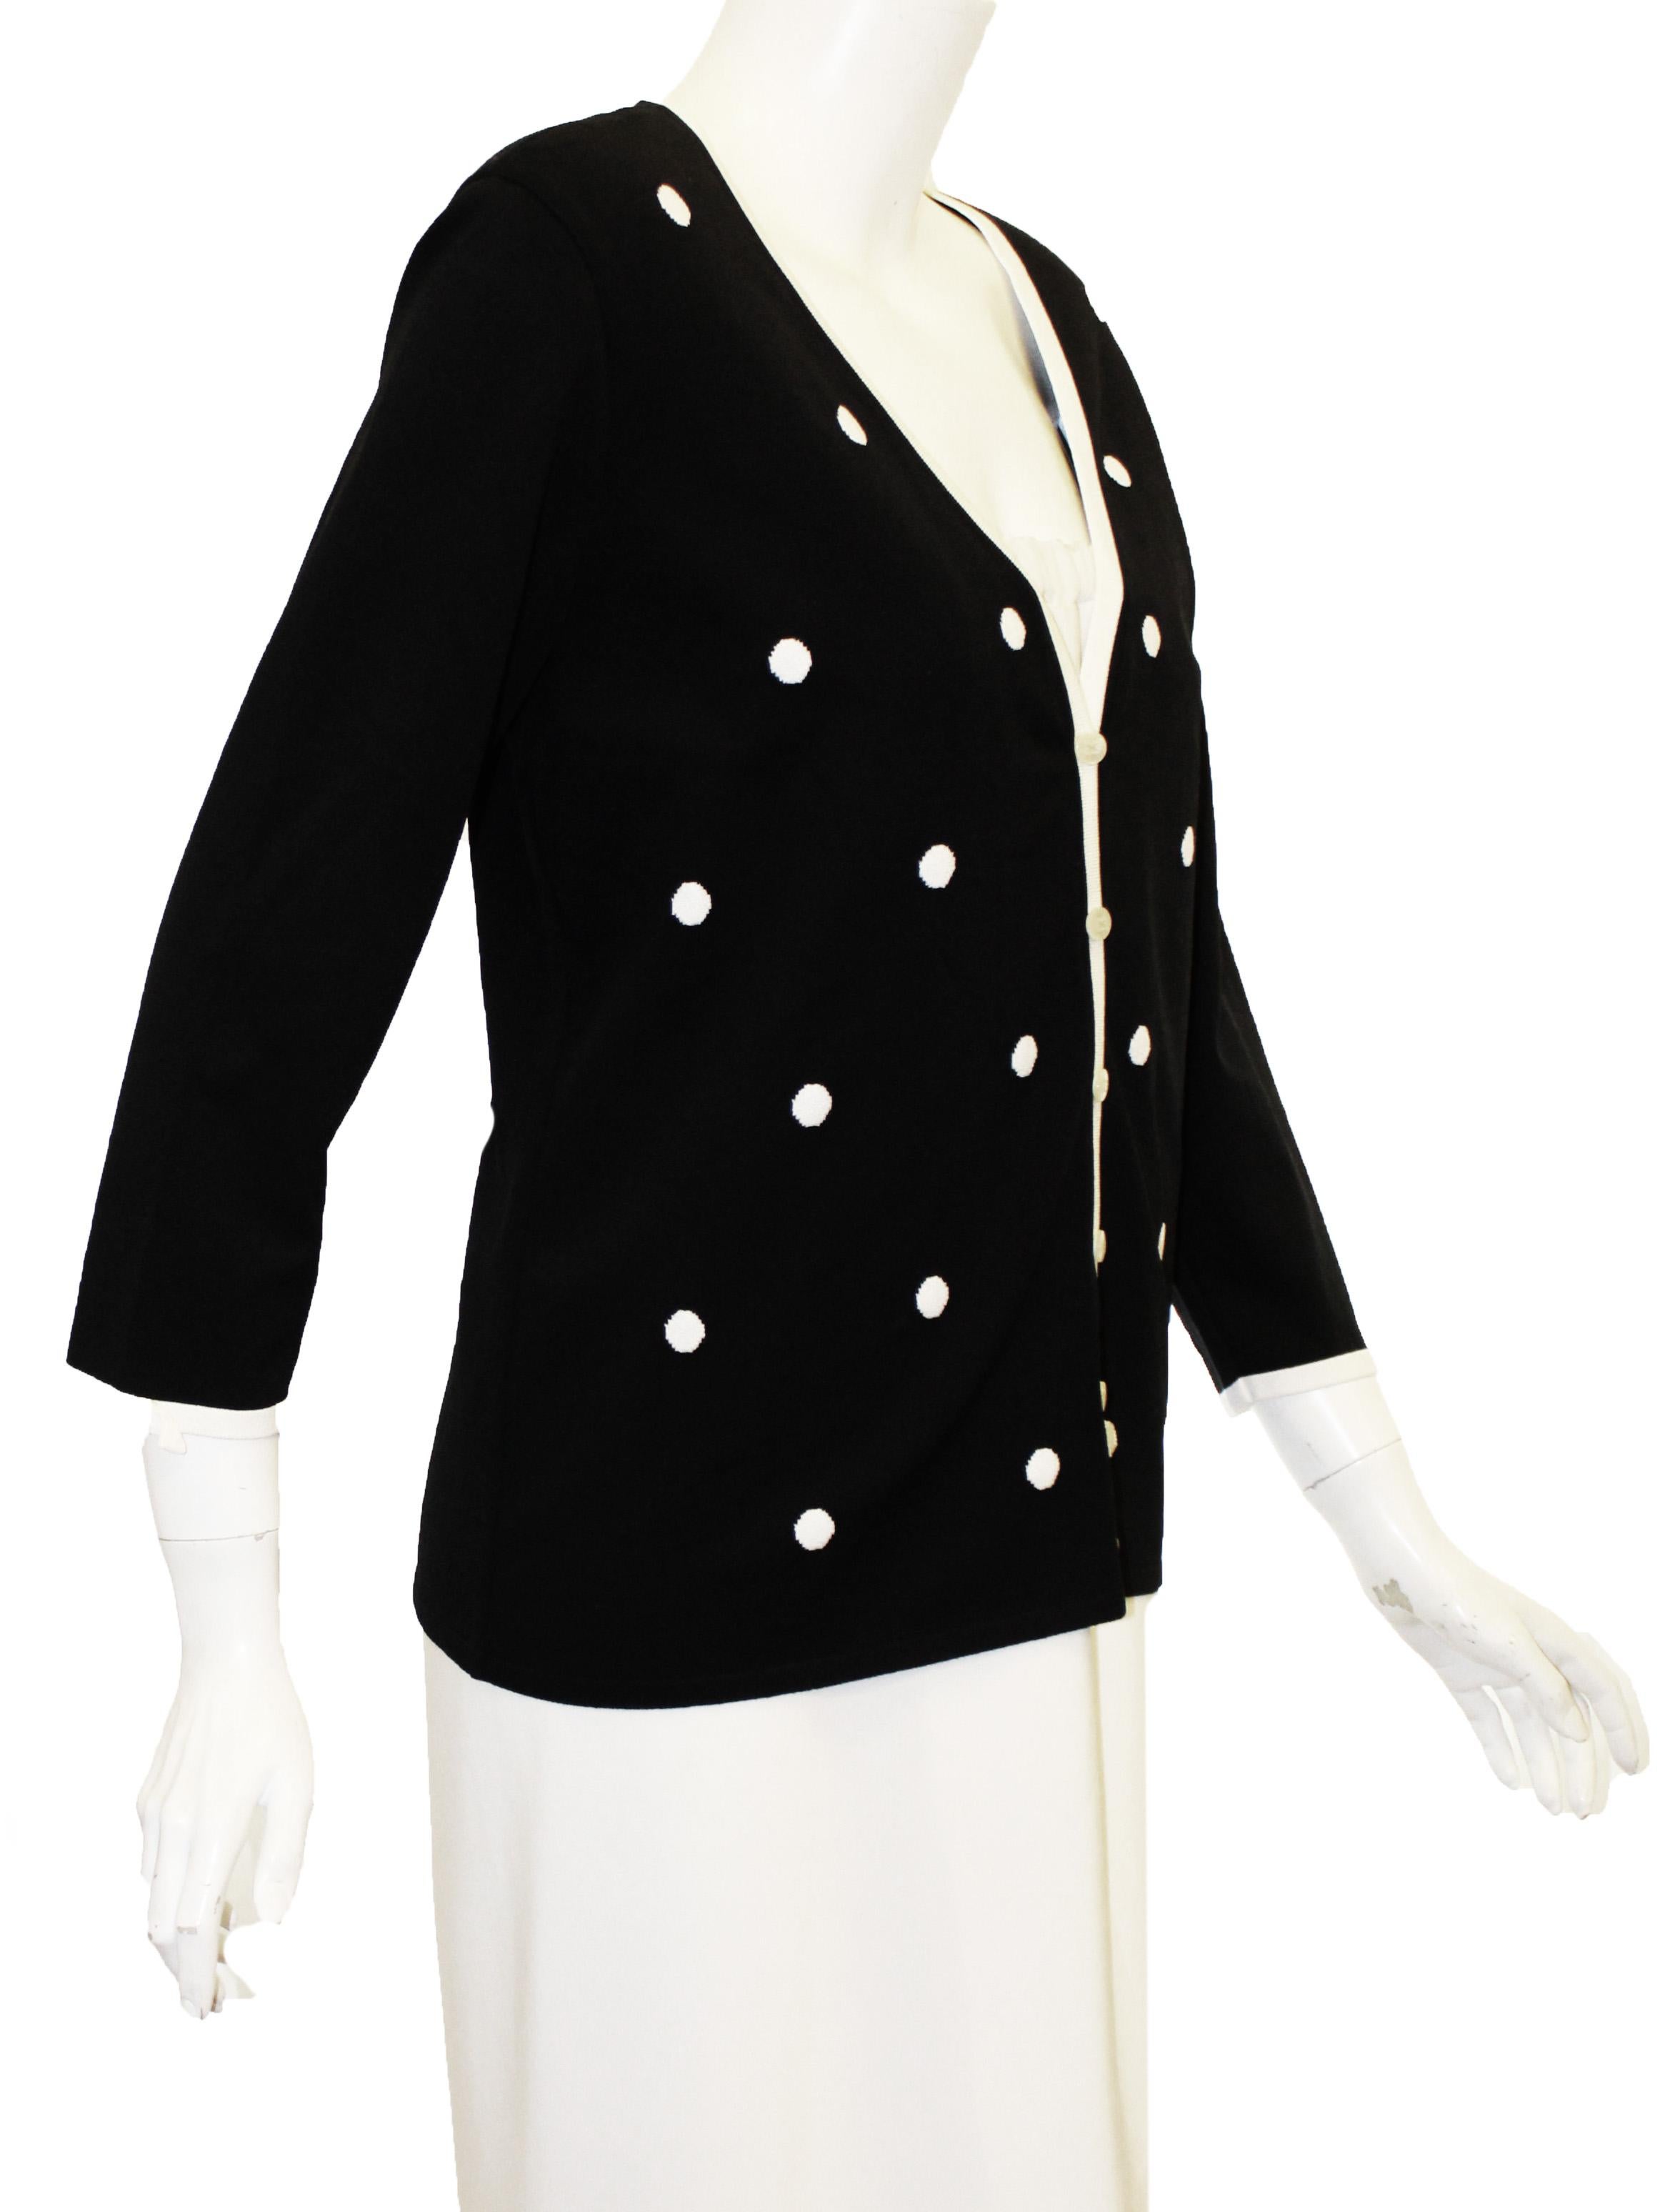 Escada black and white cardigan with white polka dots at front of jacket includes six Escada logo buttons for front closure.  This V neck cardigan has a white trim along the neckline and border of 3/4 sleeves.  This jacket is not lined.  Jacket in